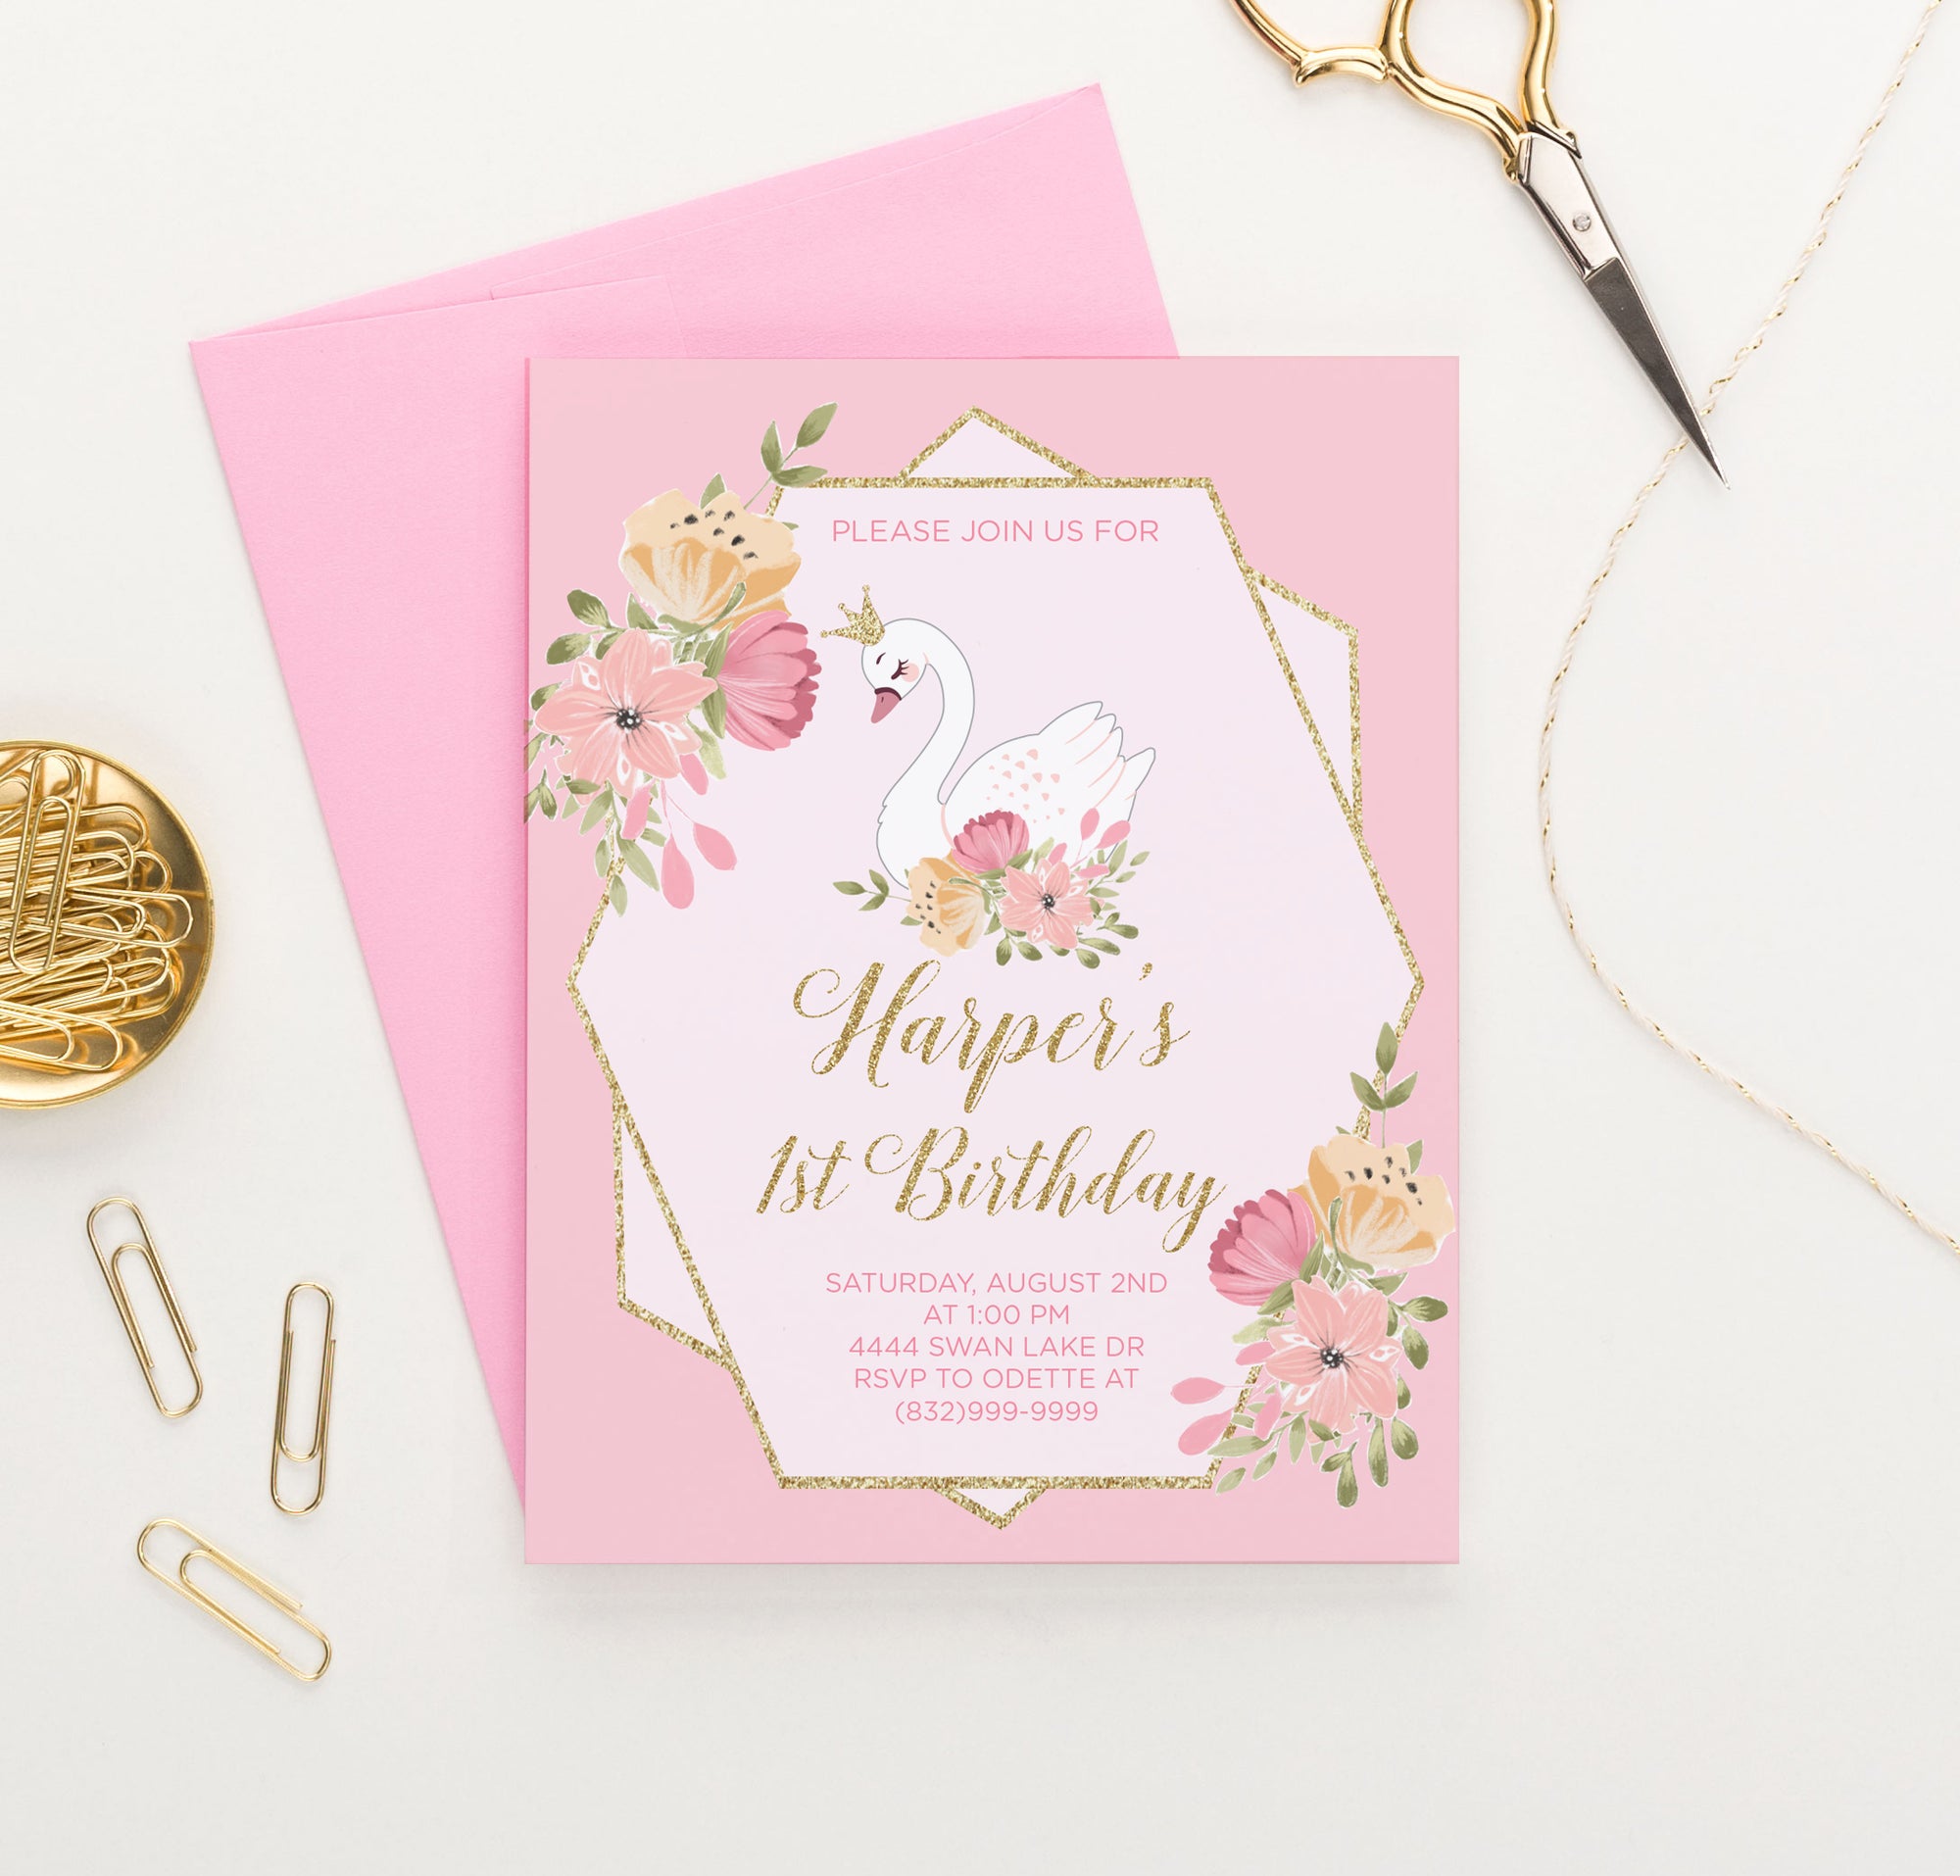 Personalized Pink Floral Birthday Invitations With Swan